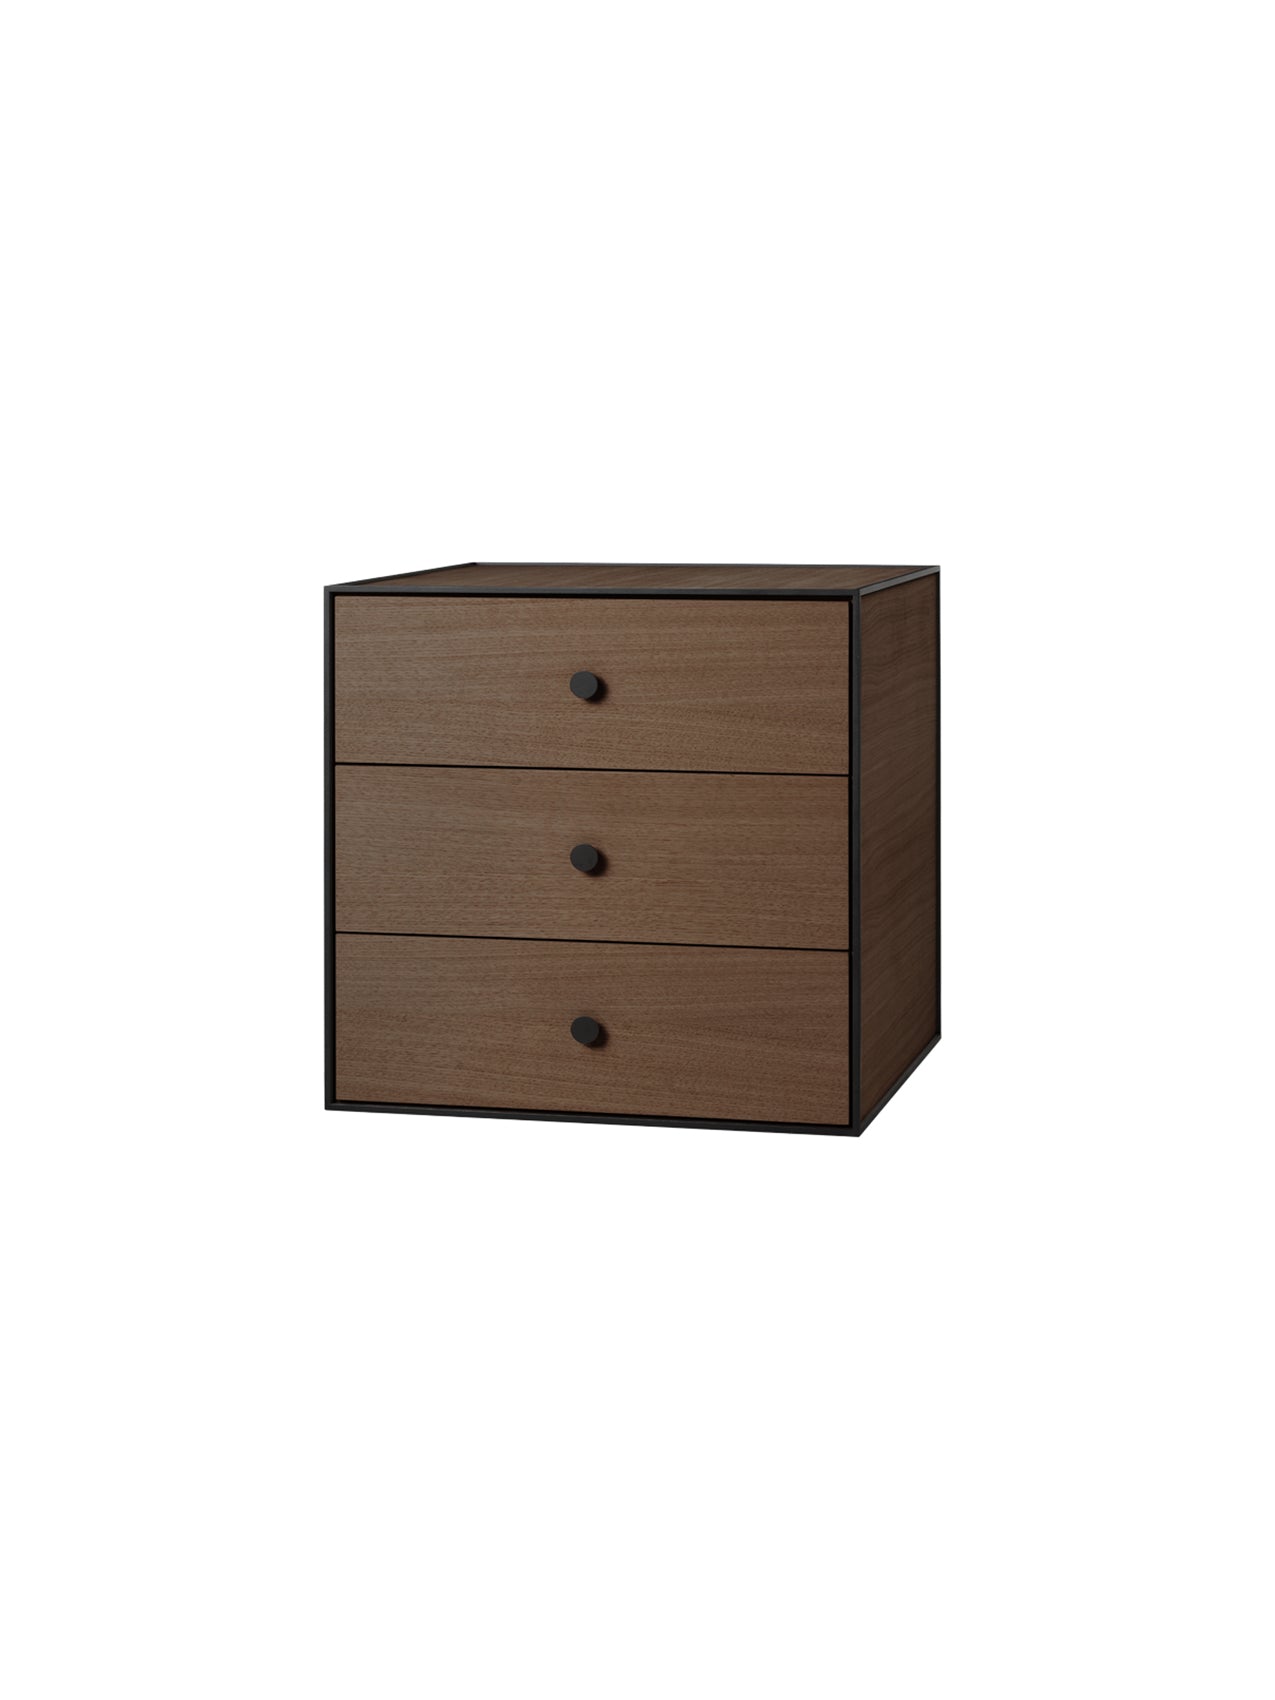 Large Frame with Drawer, Special Offers